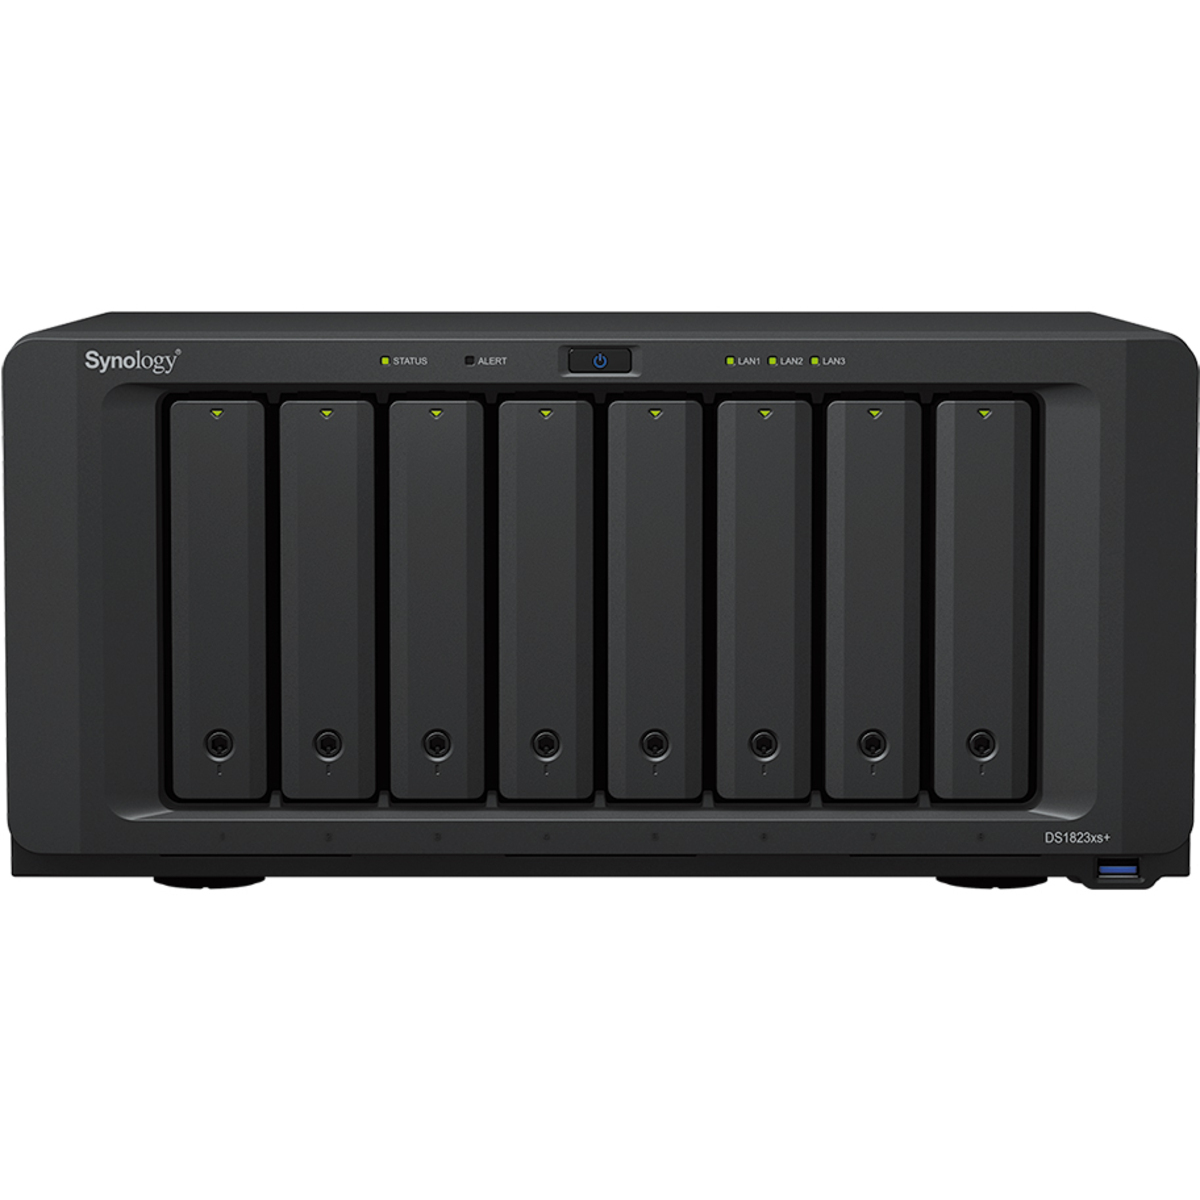 Synology DiskStation DS1823xs+ 140tb 8-Bay Desktop Multimedia / Power User / Business NAS - Network Attached Storage Device 7x20tb Seagate EXOS X20 ST20000NM007D 3.5 7200rpm SATA 6Gb/s HDD ENTERPRISE Class Drives Installed - Burn-In Tested DiskStation DS1823xs+